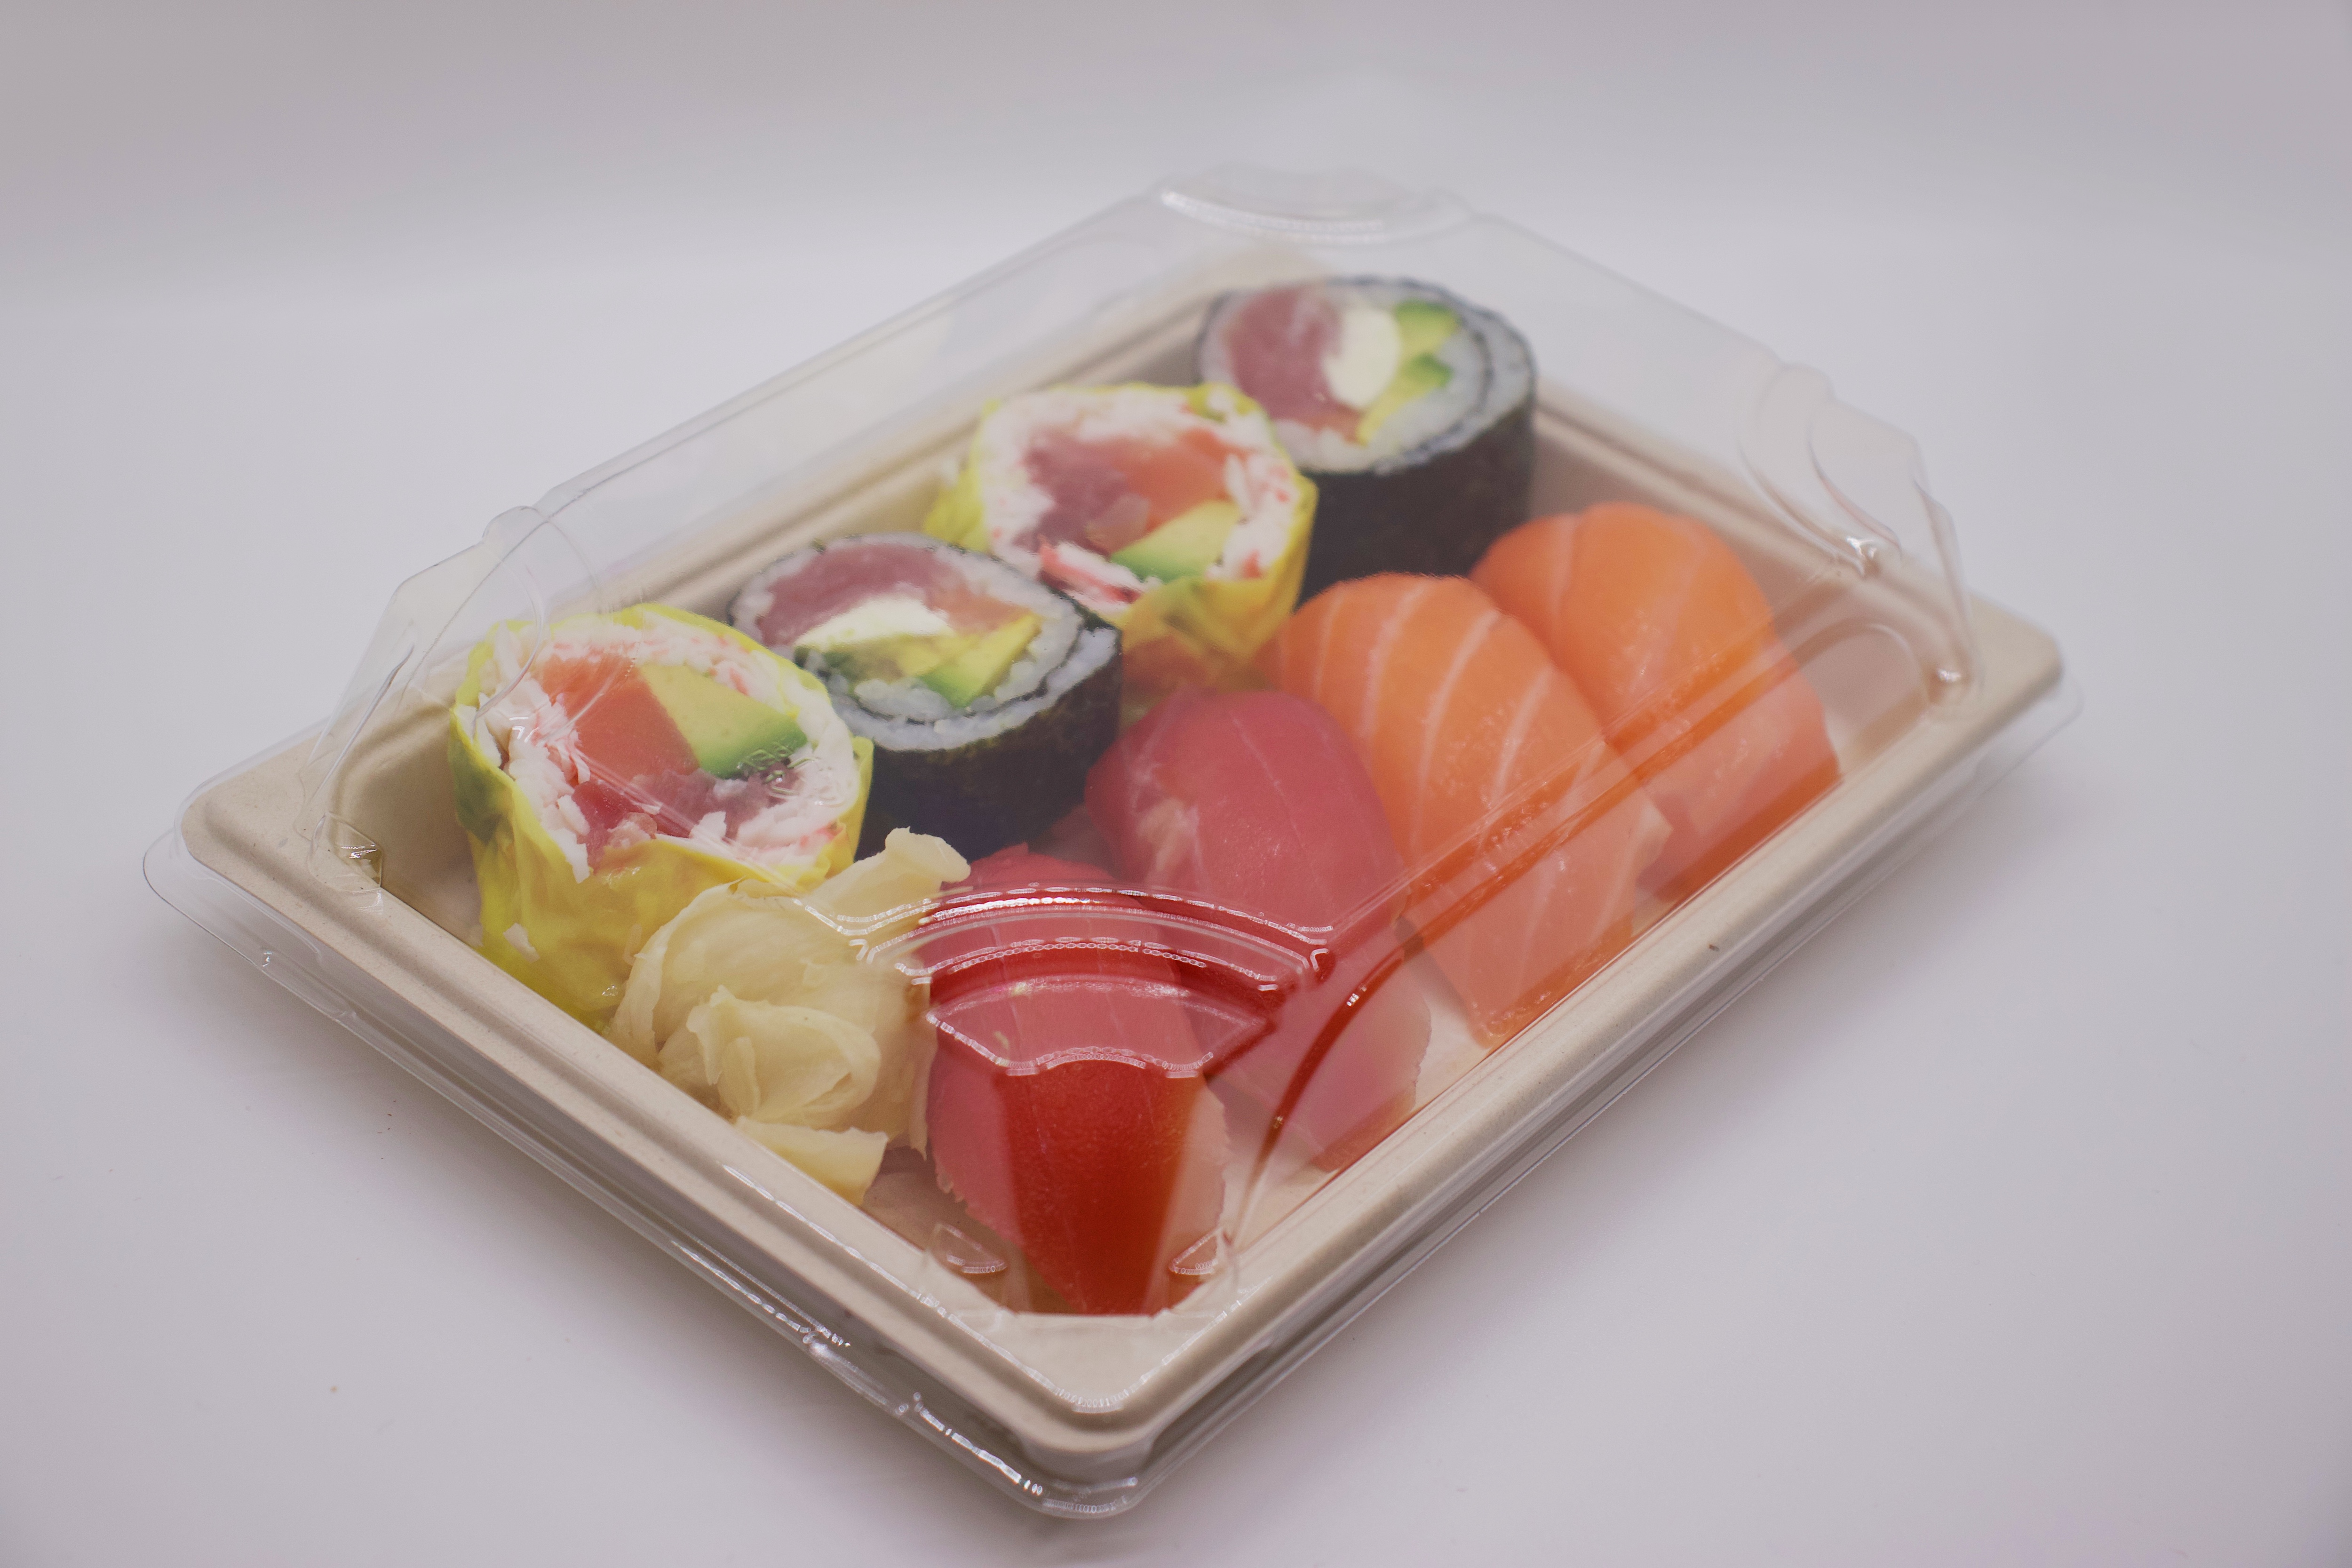 https://cdn.shopify.com/s/files/1/0550/3225/0559/collections/Small_Fiber_Sushi_Tray_-Eco-friendly-long-sugarcane-compostable-biodegradable-plant-based.png?v=1618364415